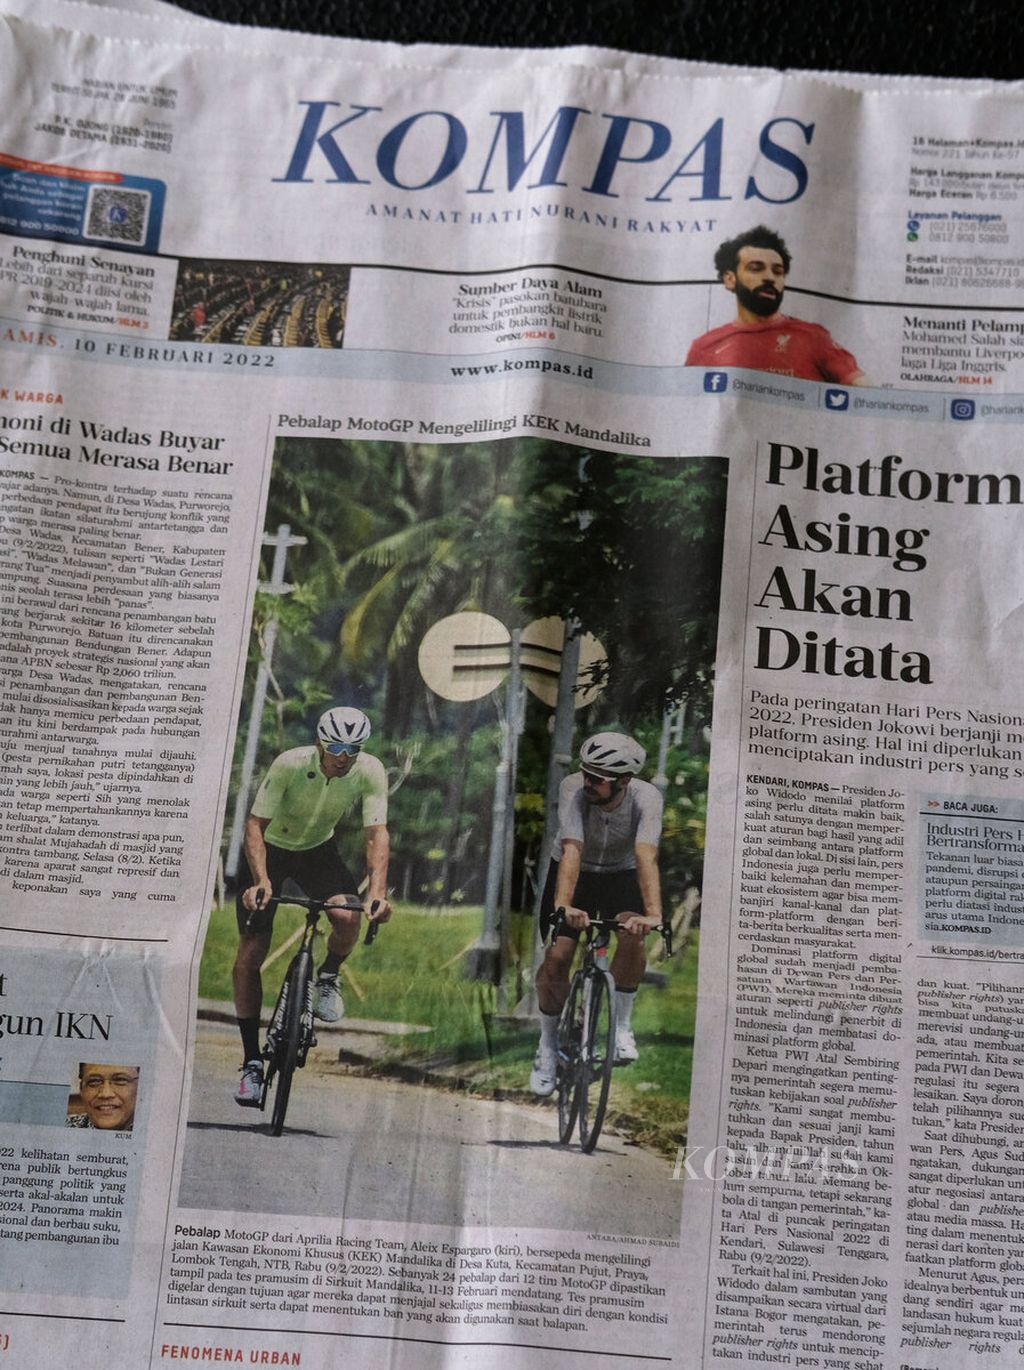 The sighting of the Thursday edition of Kompas (10/2/2022).